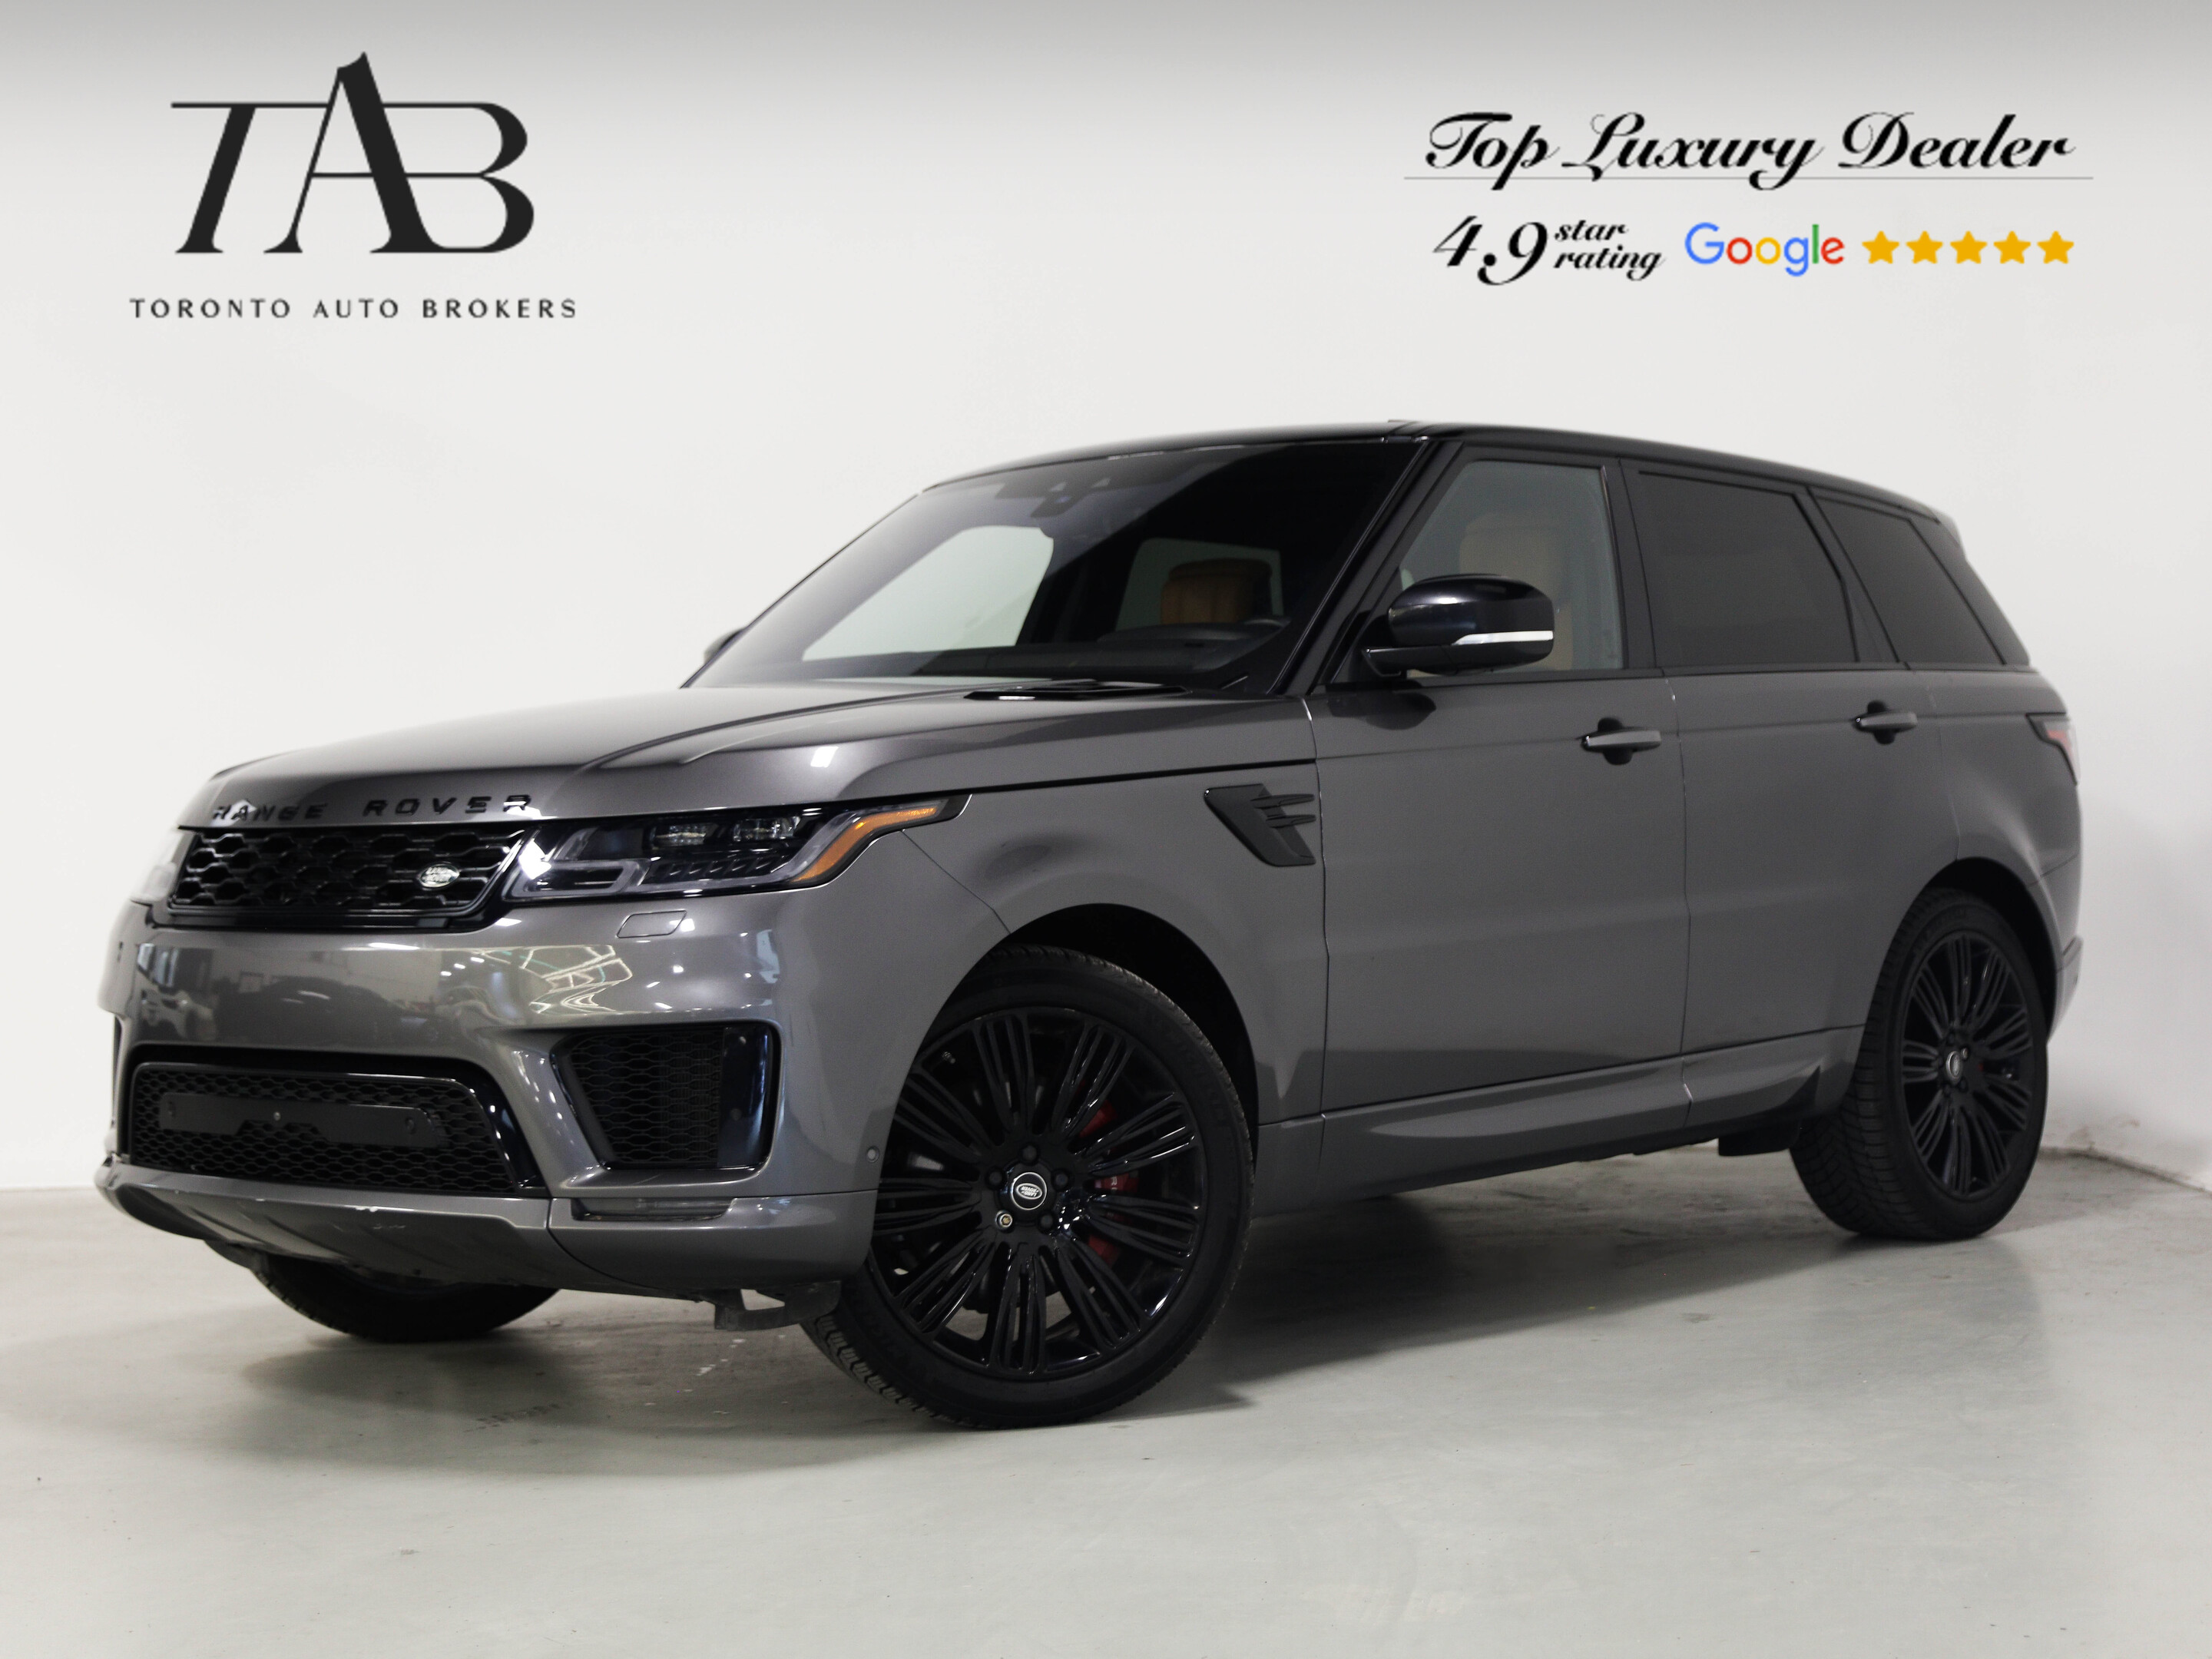 2019 Land Rover Range Rover Sport AUTOBIOGRAPHY | SUPERCHARGED | DYNAMIC